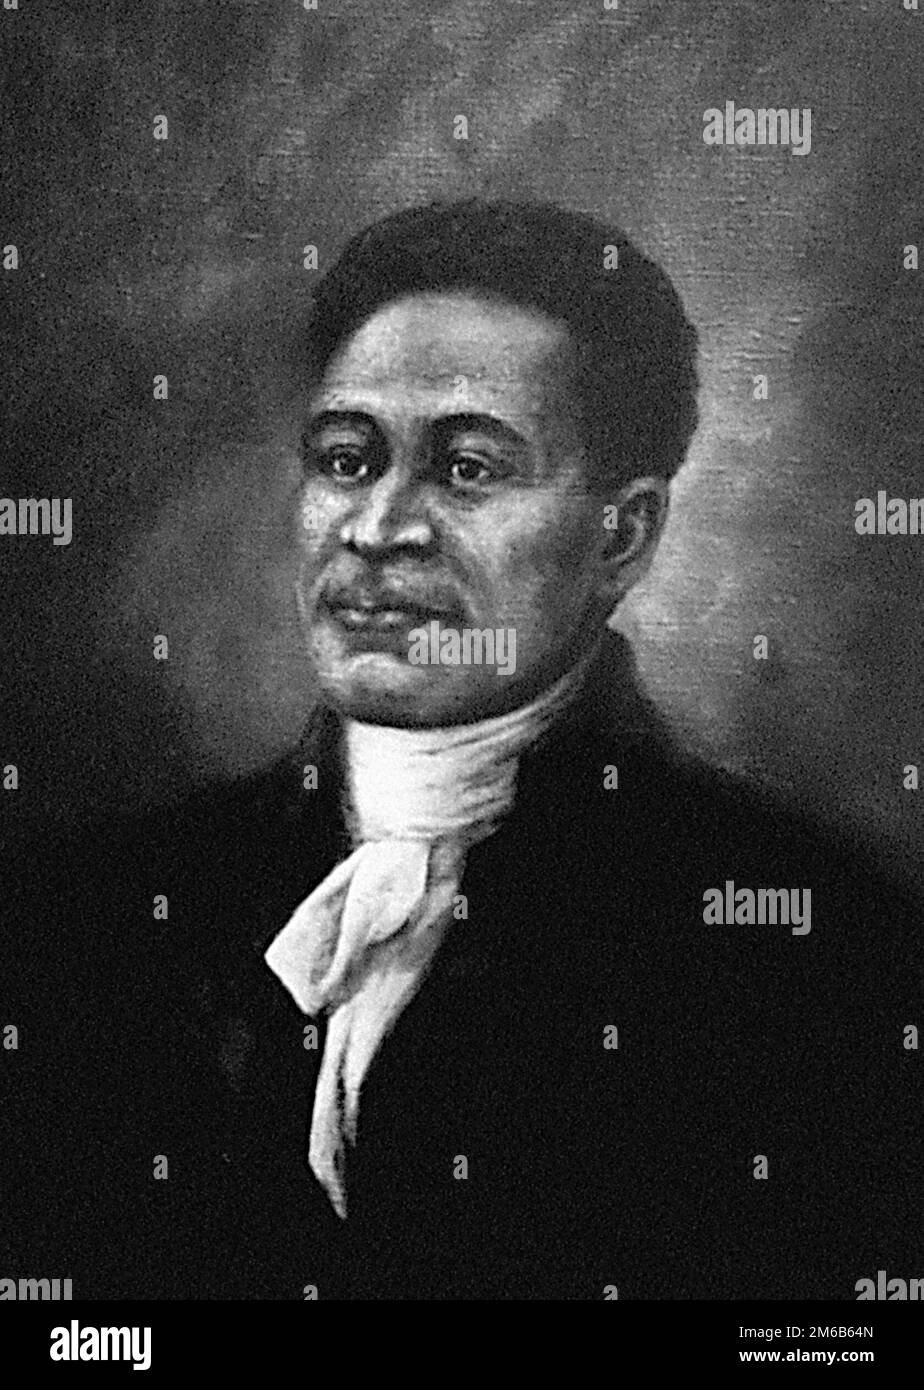 Crispus Attucks (c. 1723 -1770) was an American whaler, sailor, and stevedore of African and Native American descent, who is regarded as the first person killed in the Boston Massacre and, as a result, the first American killed in the American Revolution. Stock Photo